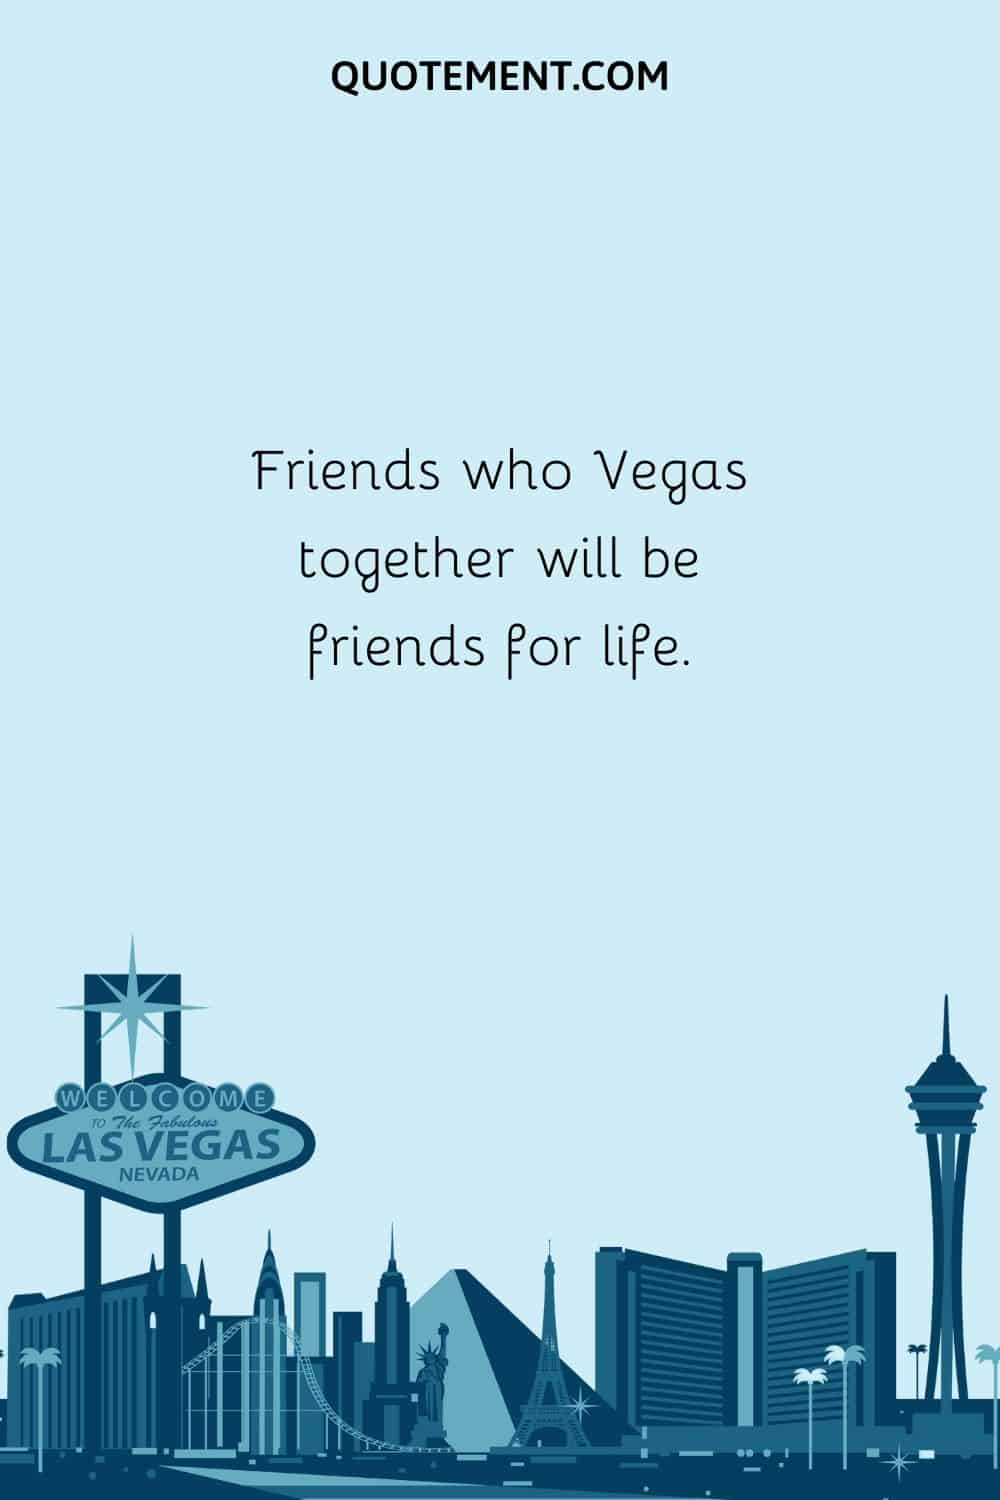 Friends who Vegas together will be friends for life.